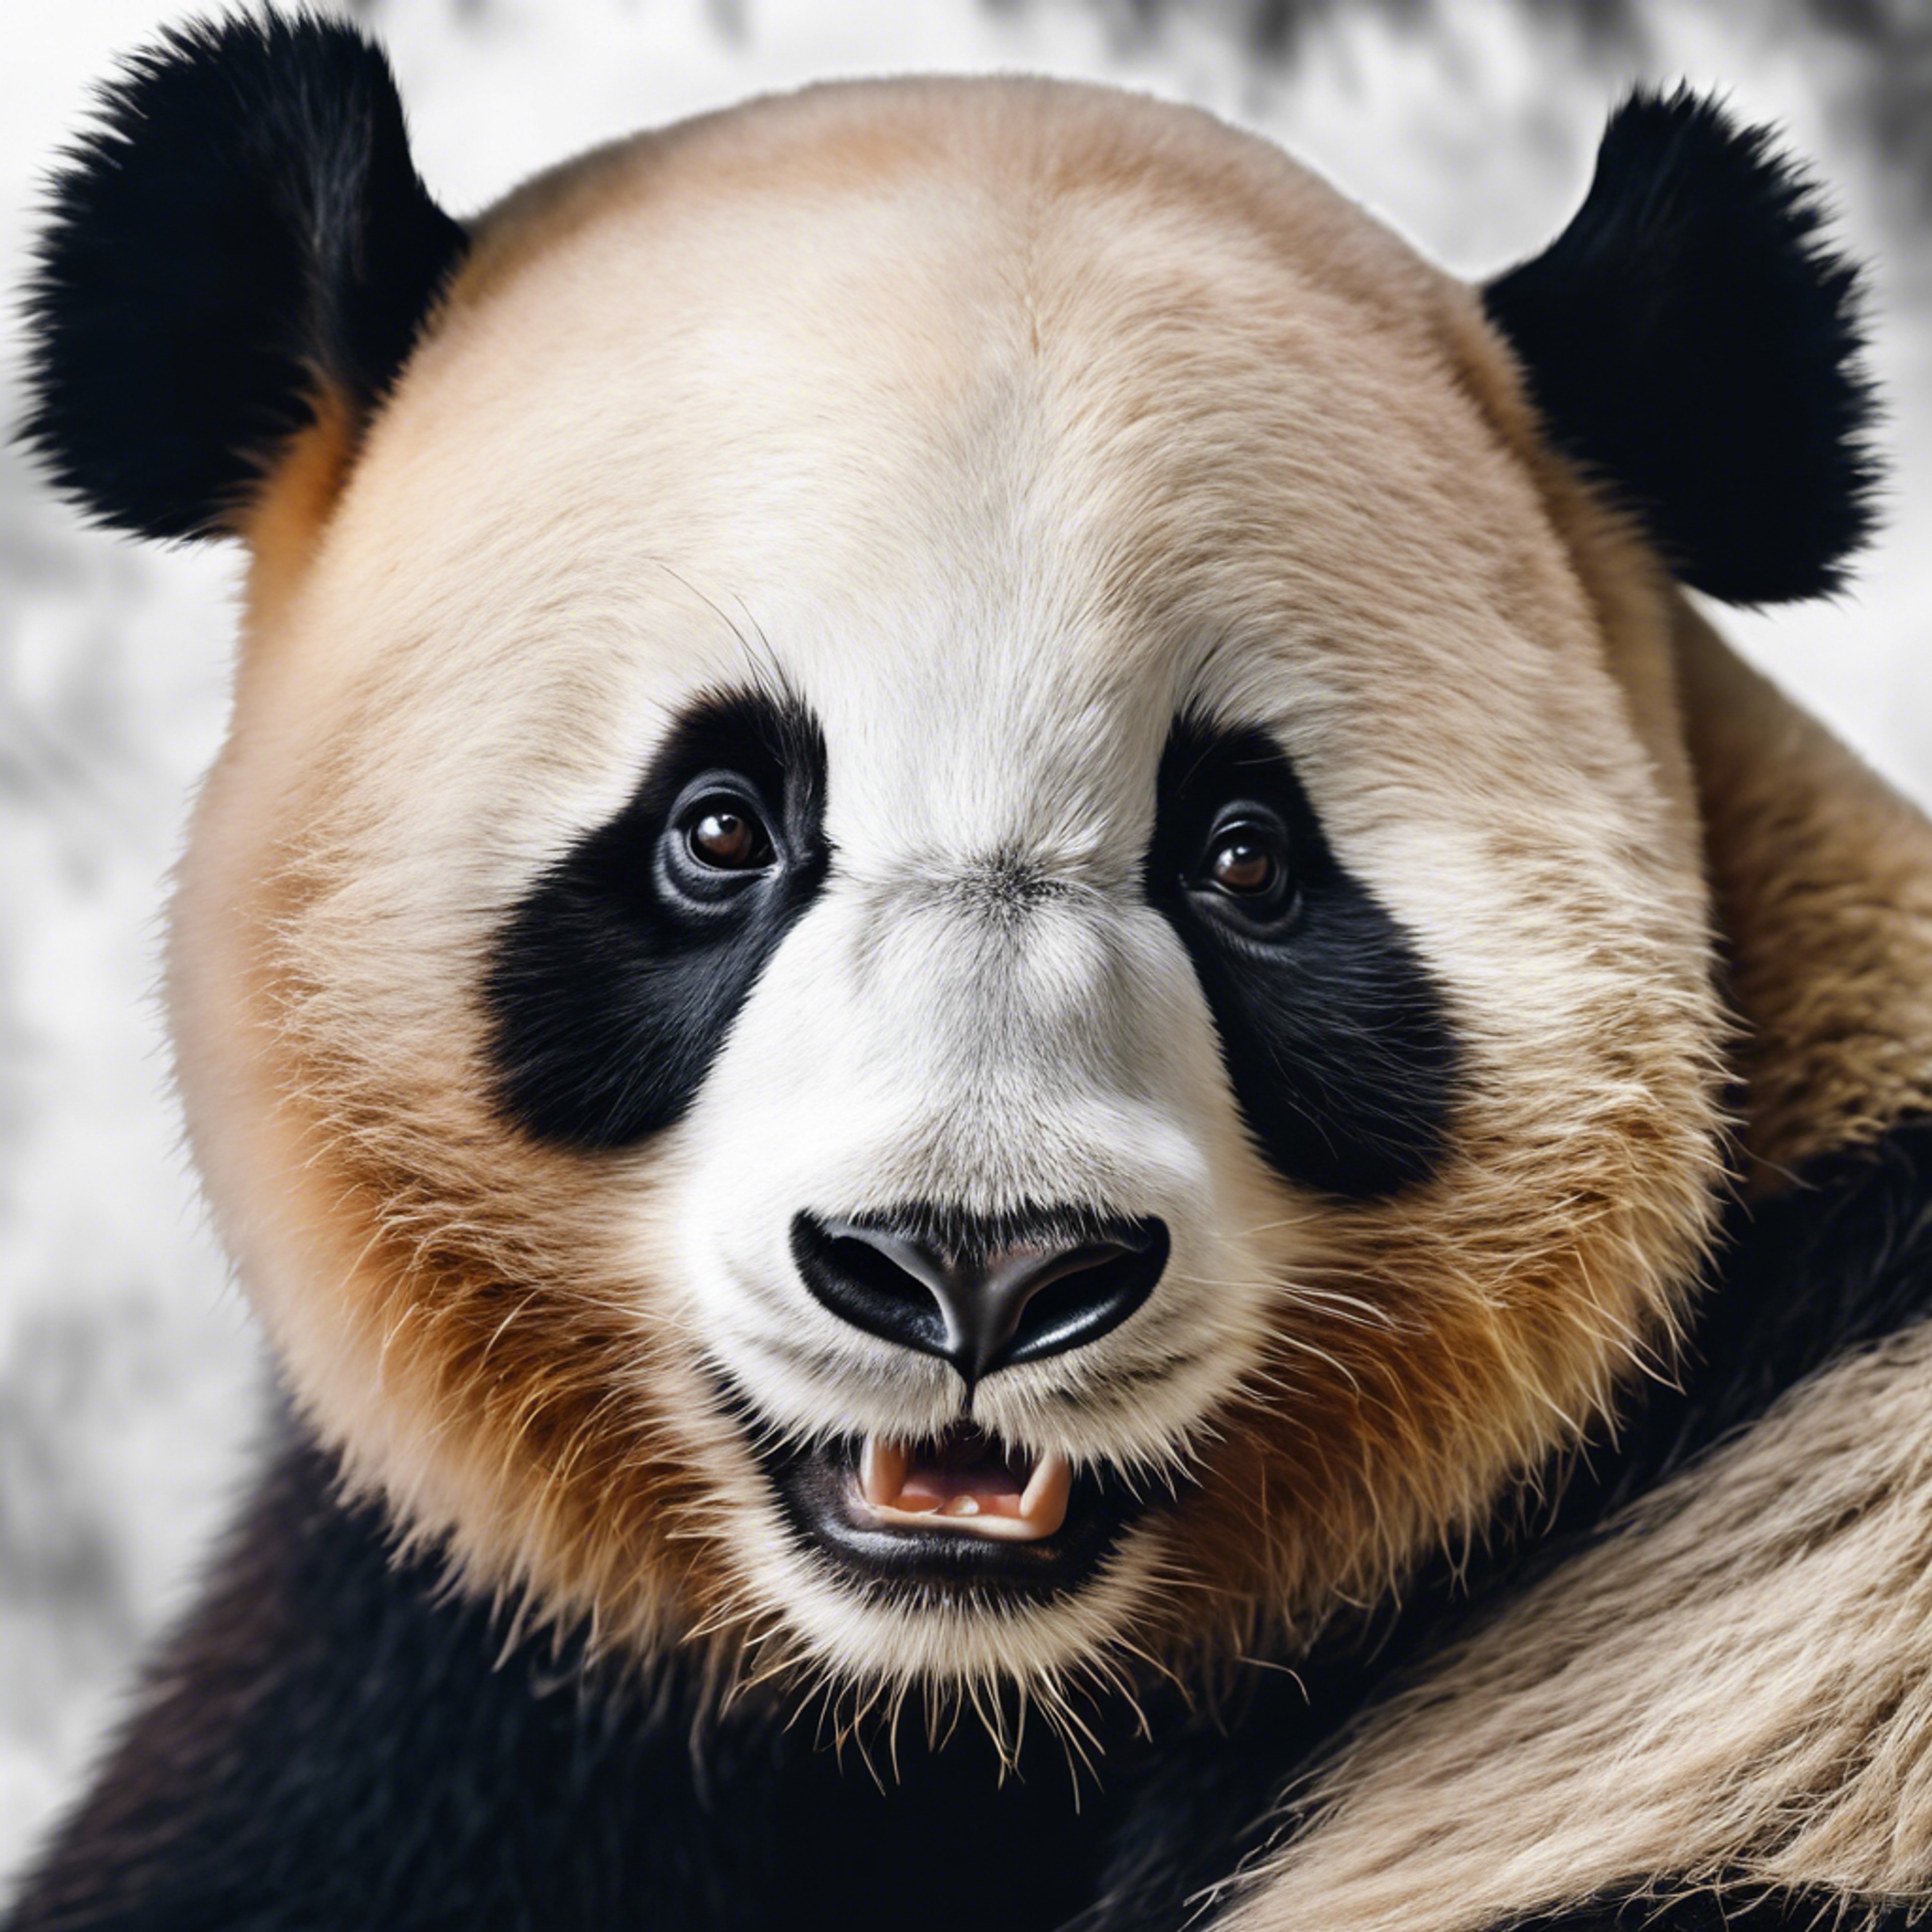 A close-up portrait of a smiling panda, showcasing the joy and charm of this magnificent creature. Tapeet[5b22781787714e61bfbc]